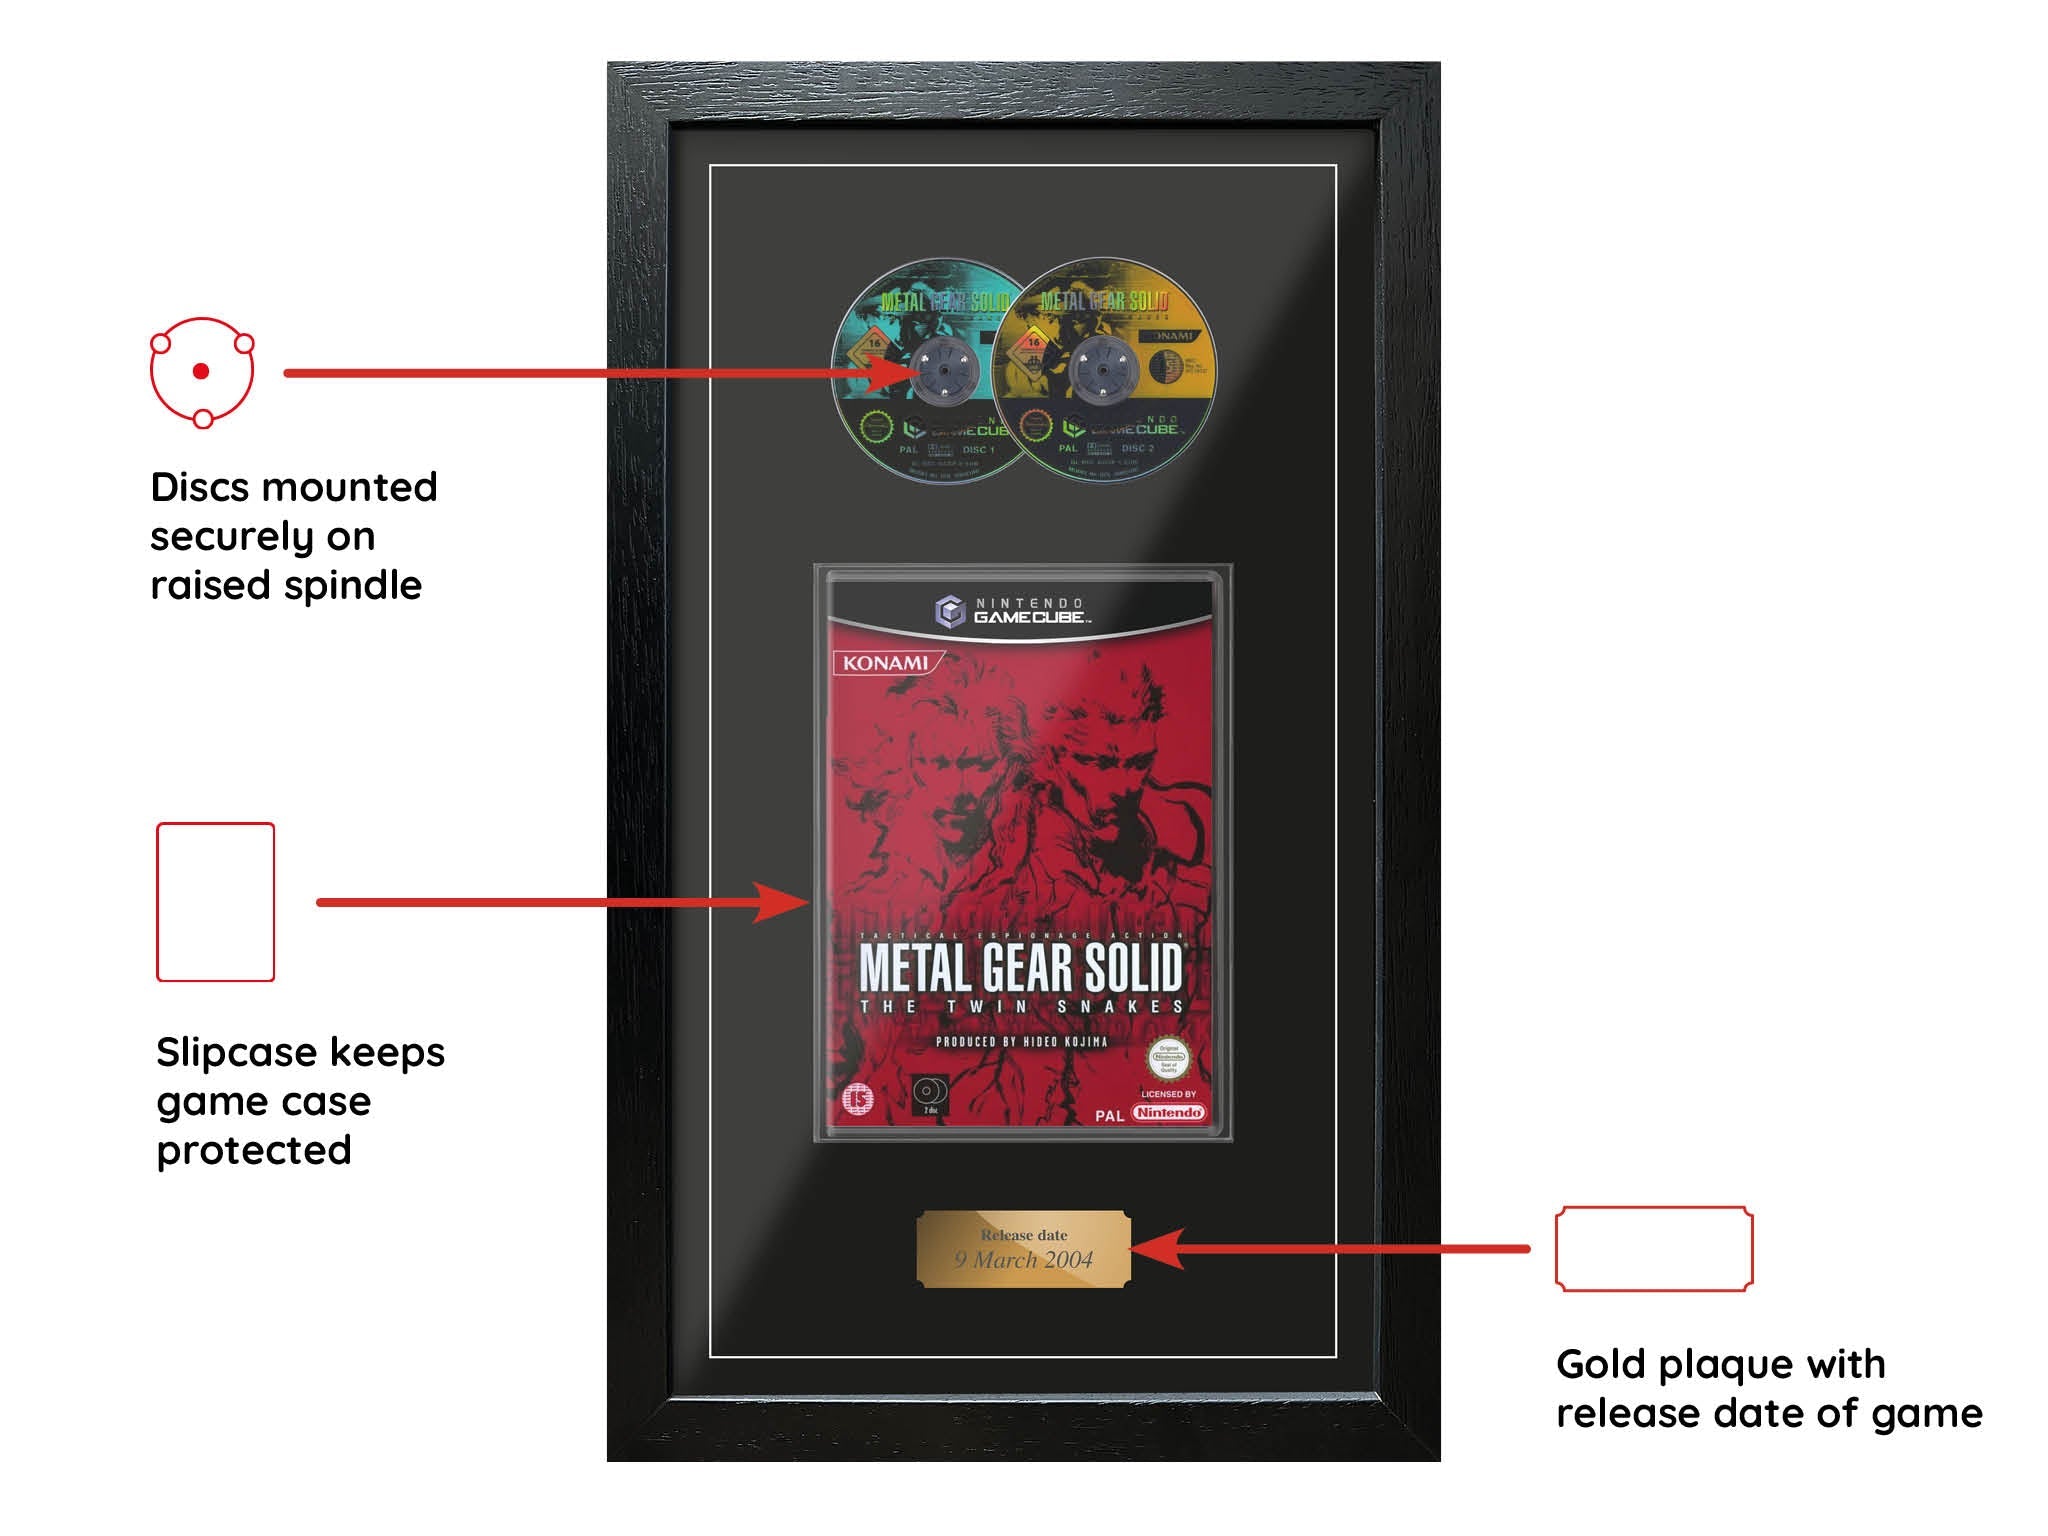 Metal Gear Solid: The Twin Snakes (Exhibition Range) Framed Game - Frame-A-Game